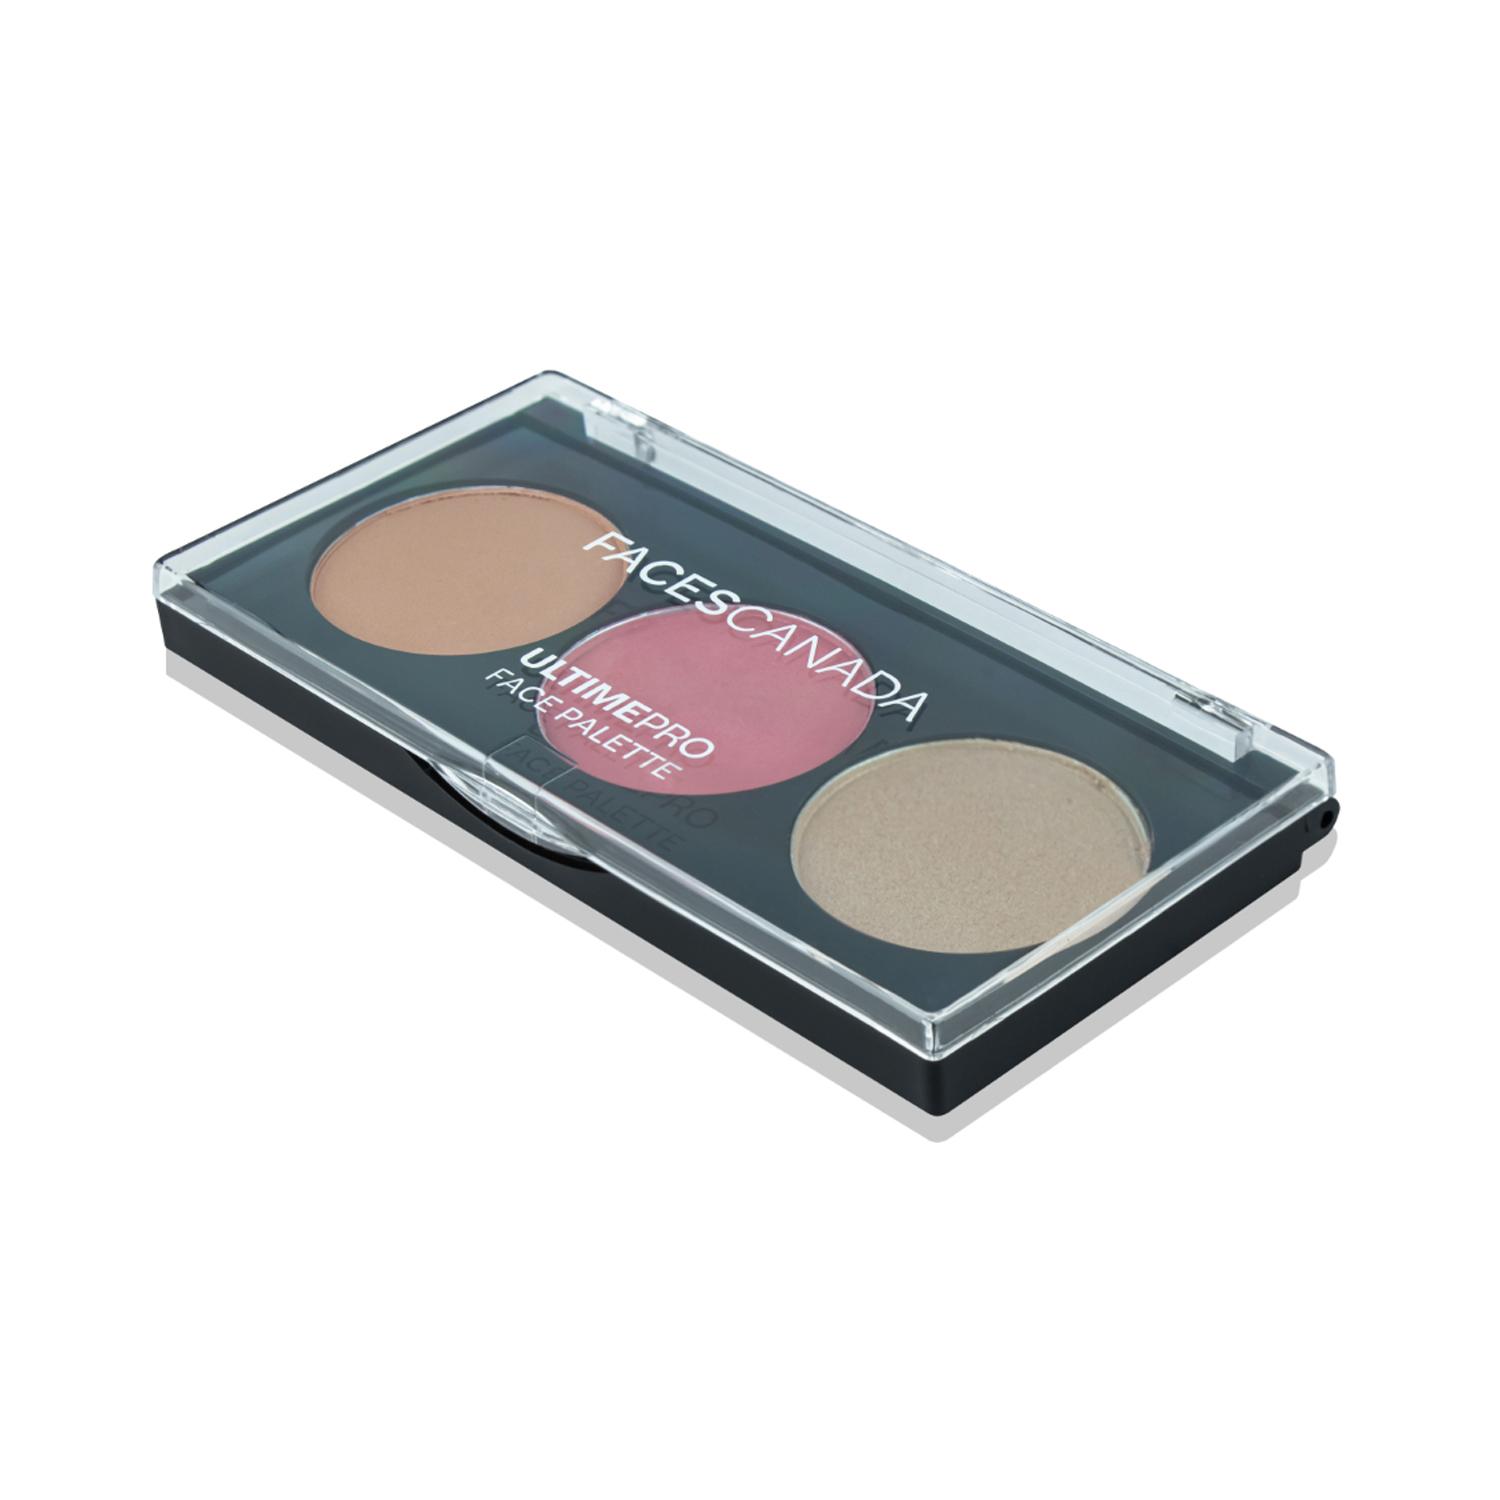 Faces Canada | Faces Canada Ultime Pro Face Palette - Rise, 3in1 Bronzer+Highlighter+Blush, Shimmer Finish (12 g)